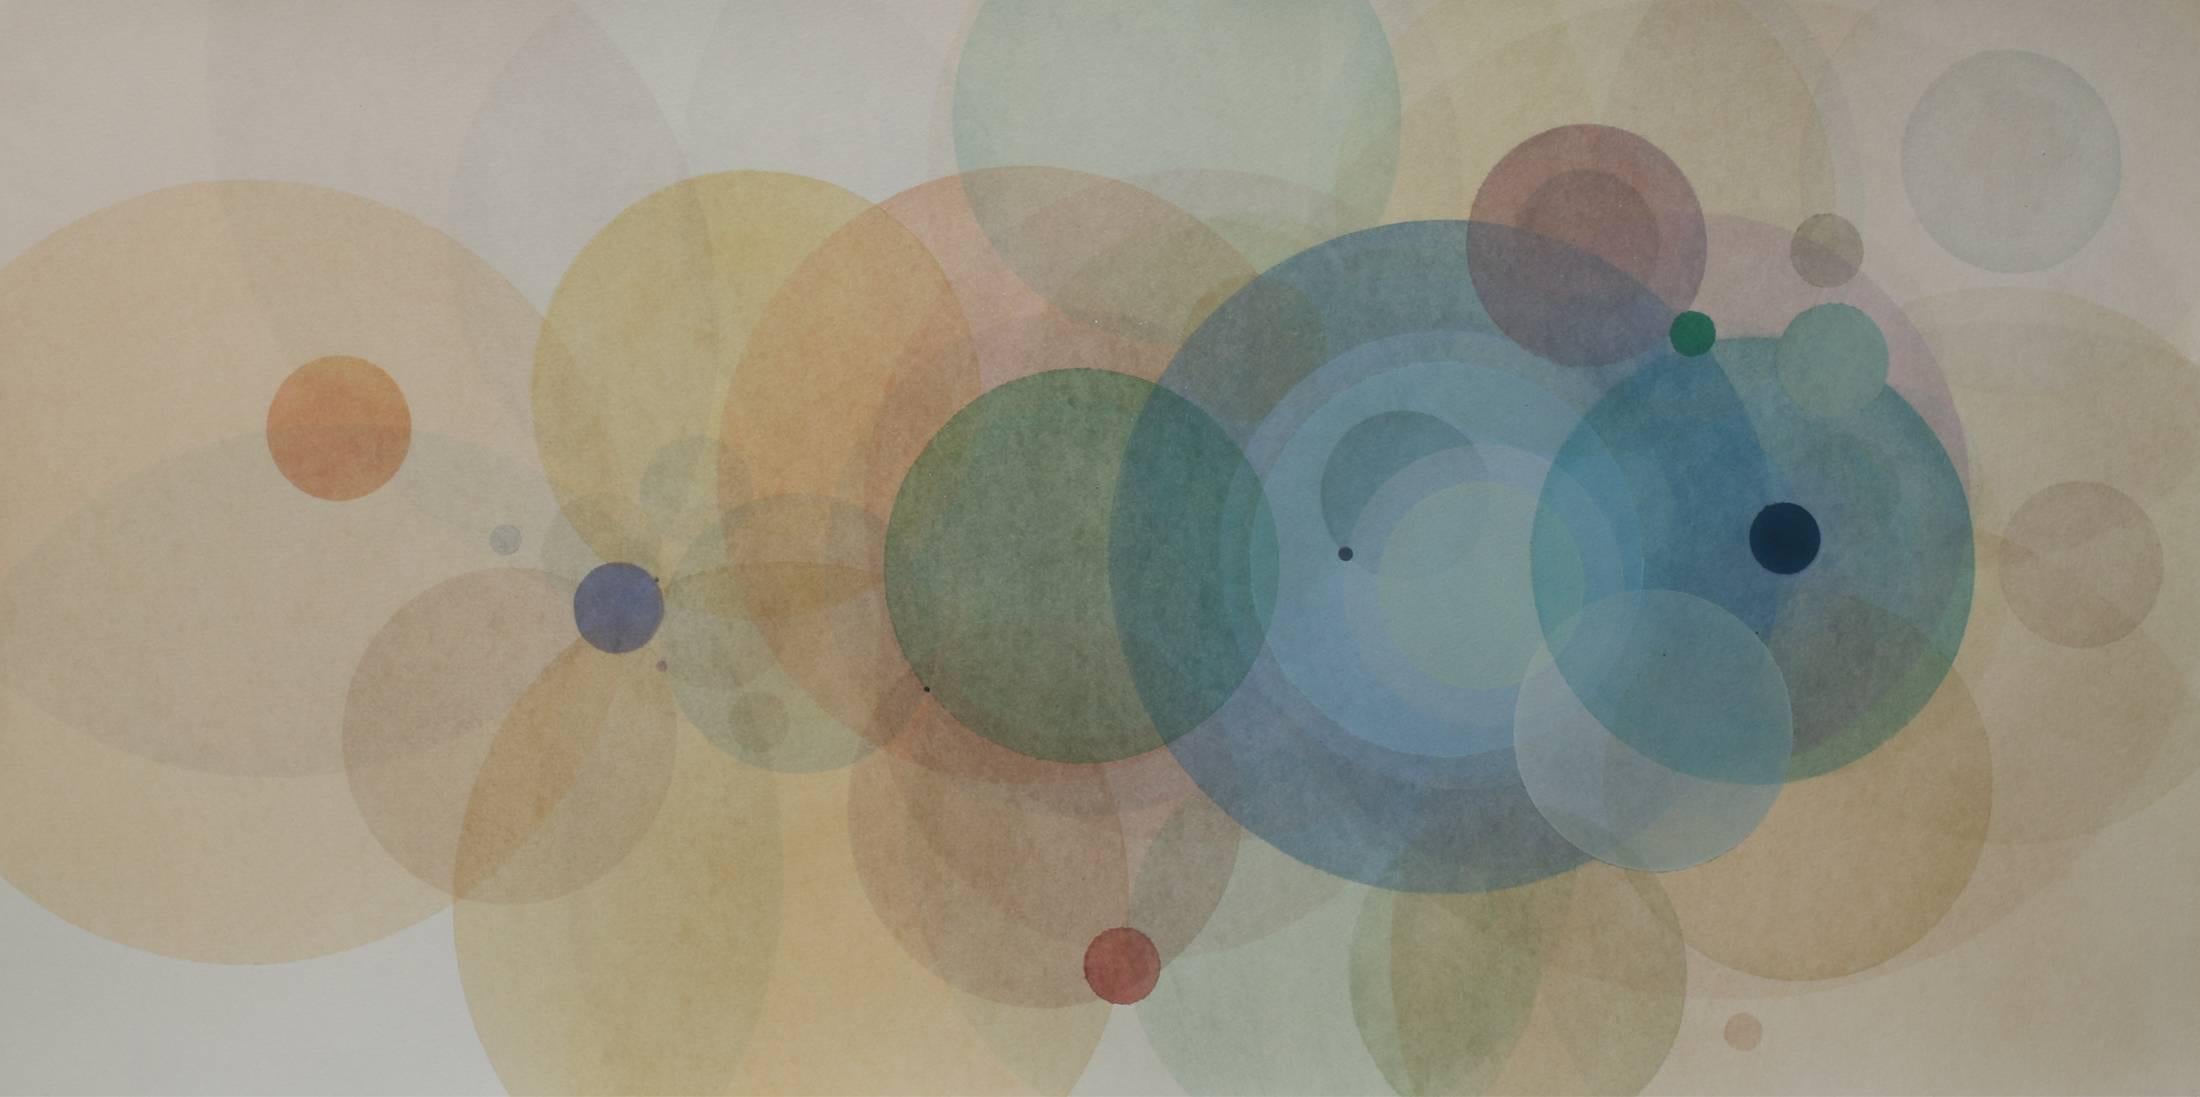 Evan Venegas Abstract Drawing - Day Map 718 - Soft pastel color abstract geometric circles watercolor on paper